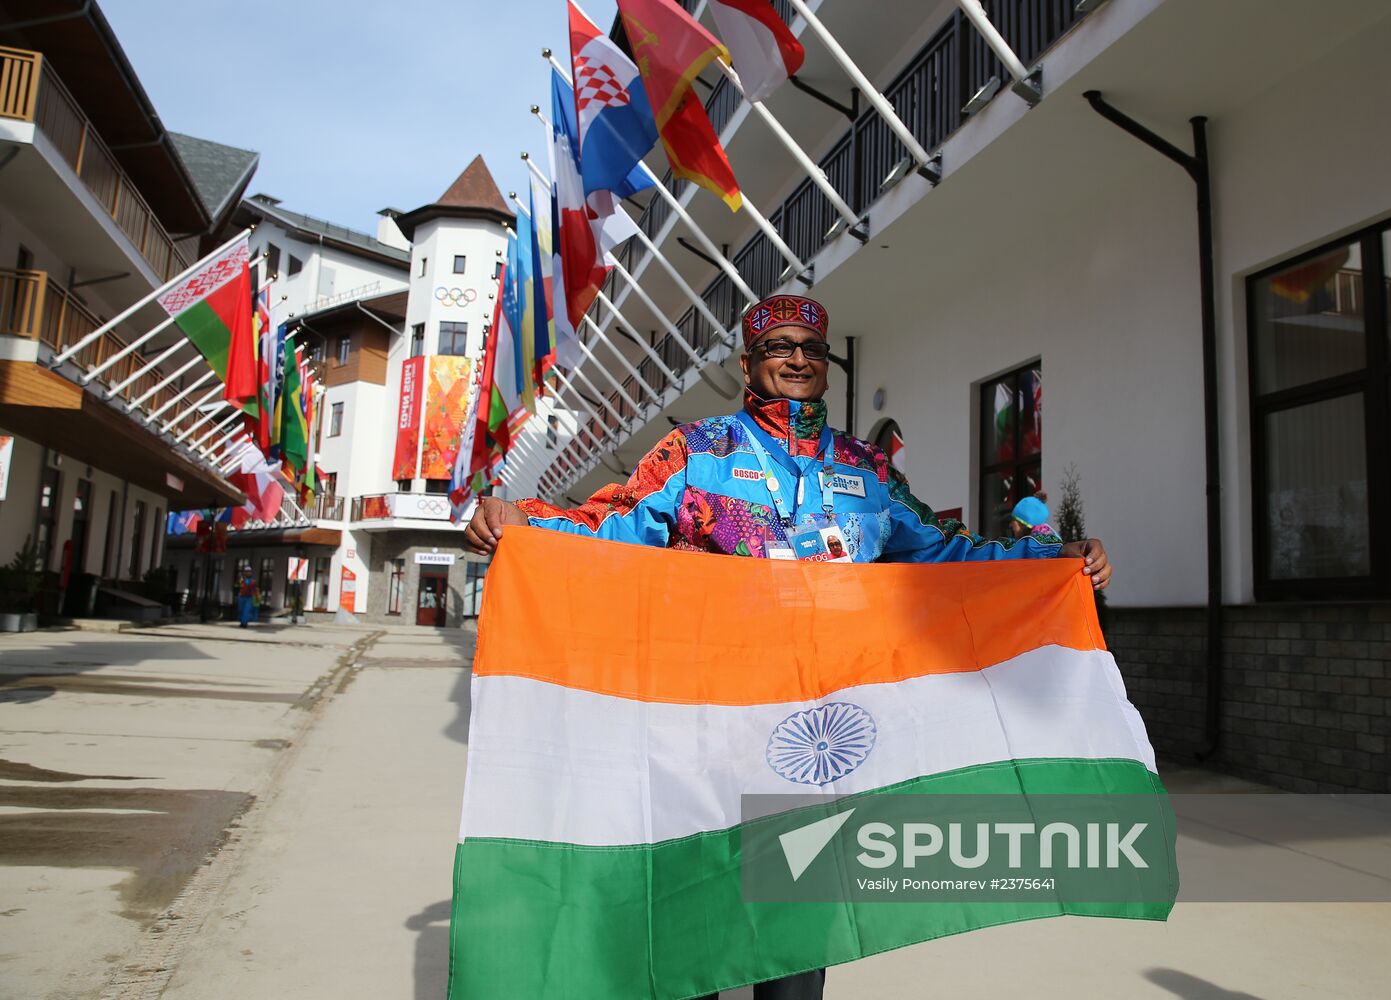 Raising the flag of India in the Mountain Olympic Village